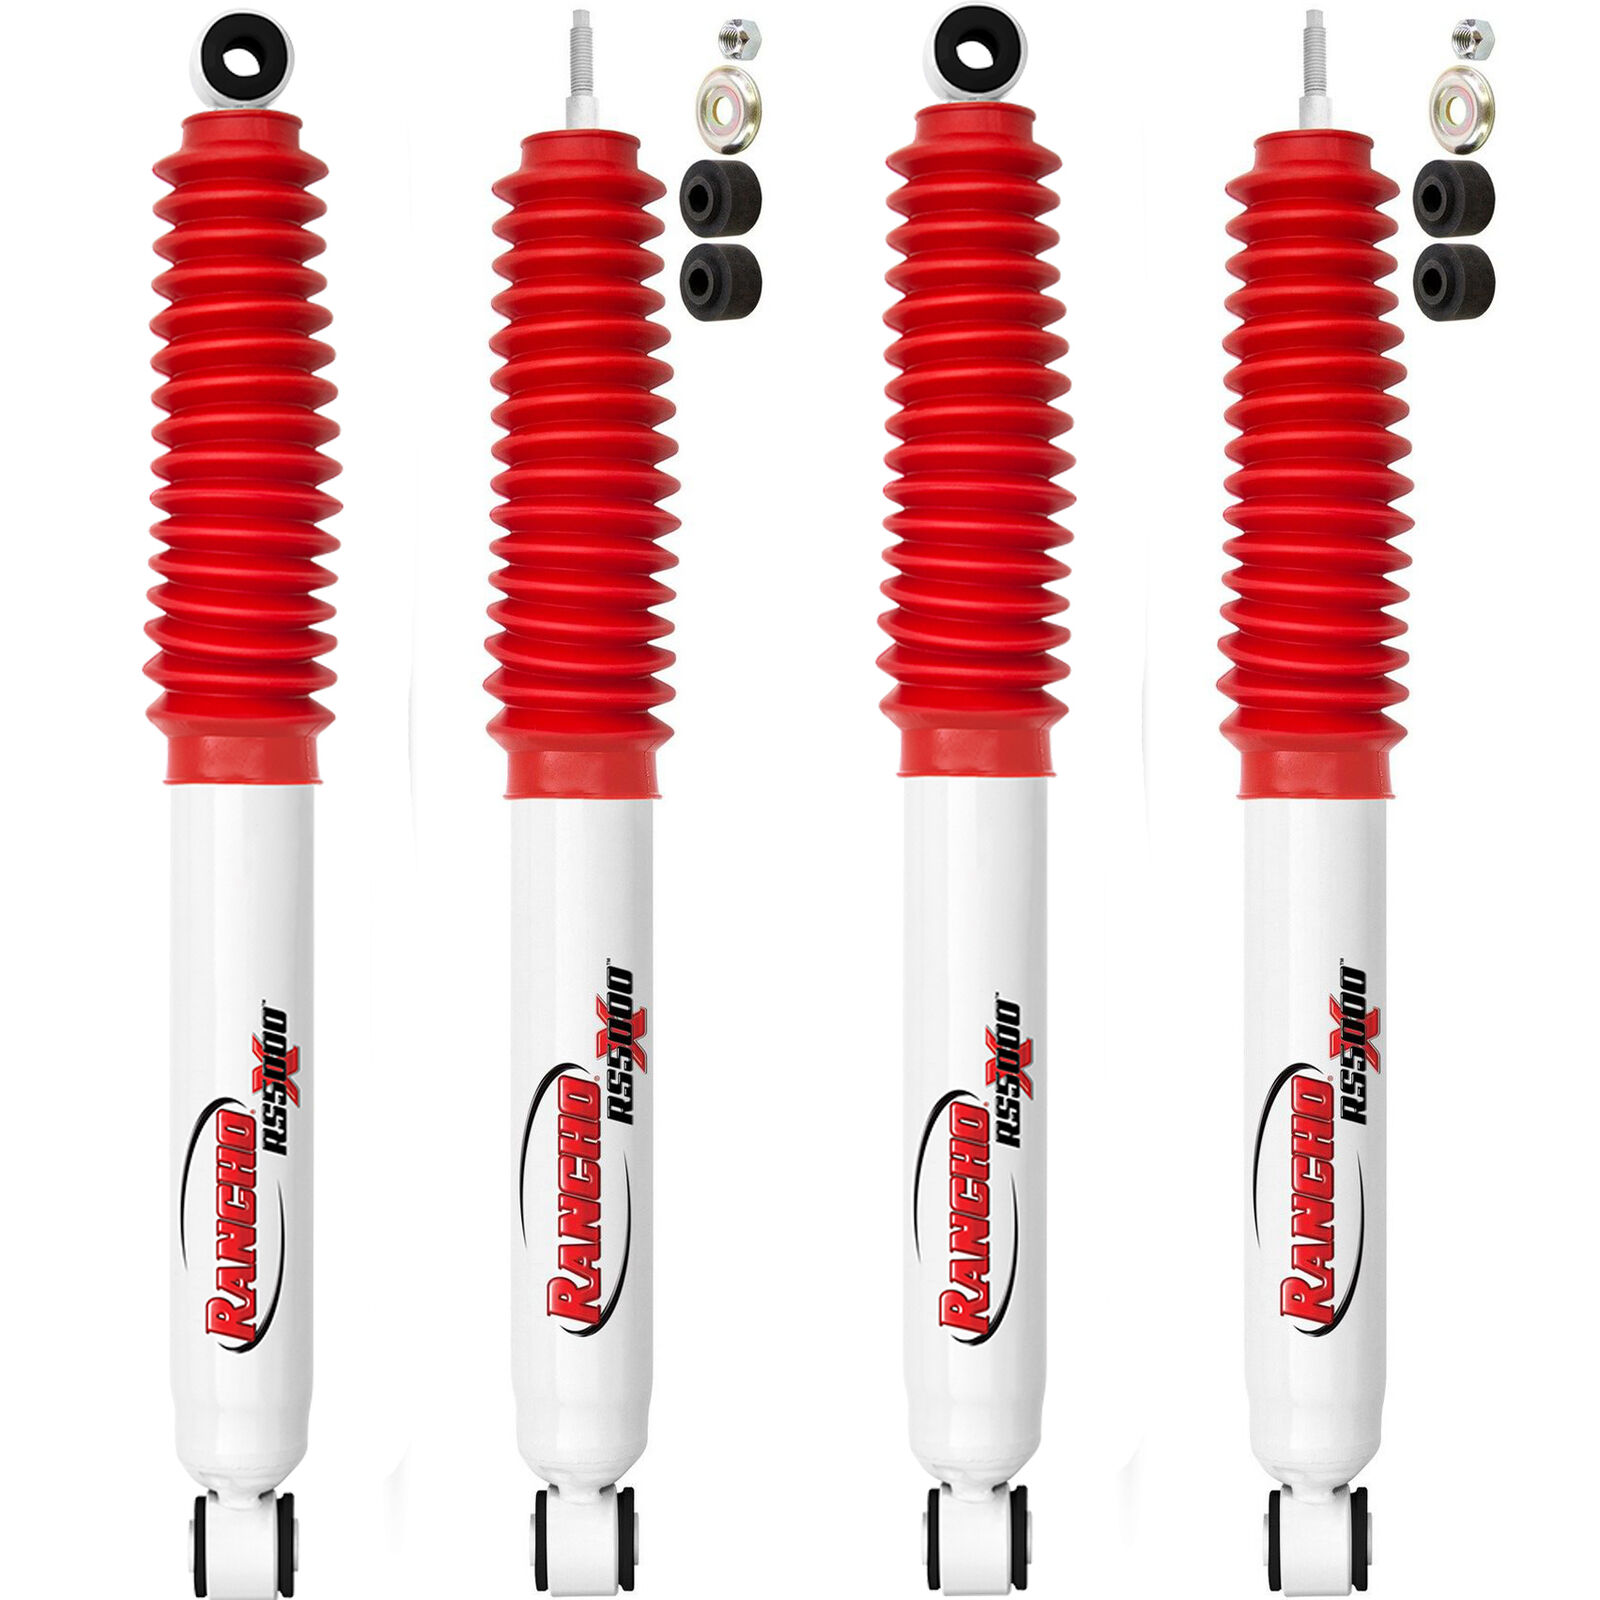 Rancho Front Rear Shock Absorbers Kit Set of 4 For Ford F-450 Super Duty 2017-22